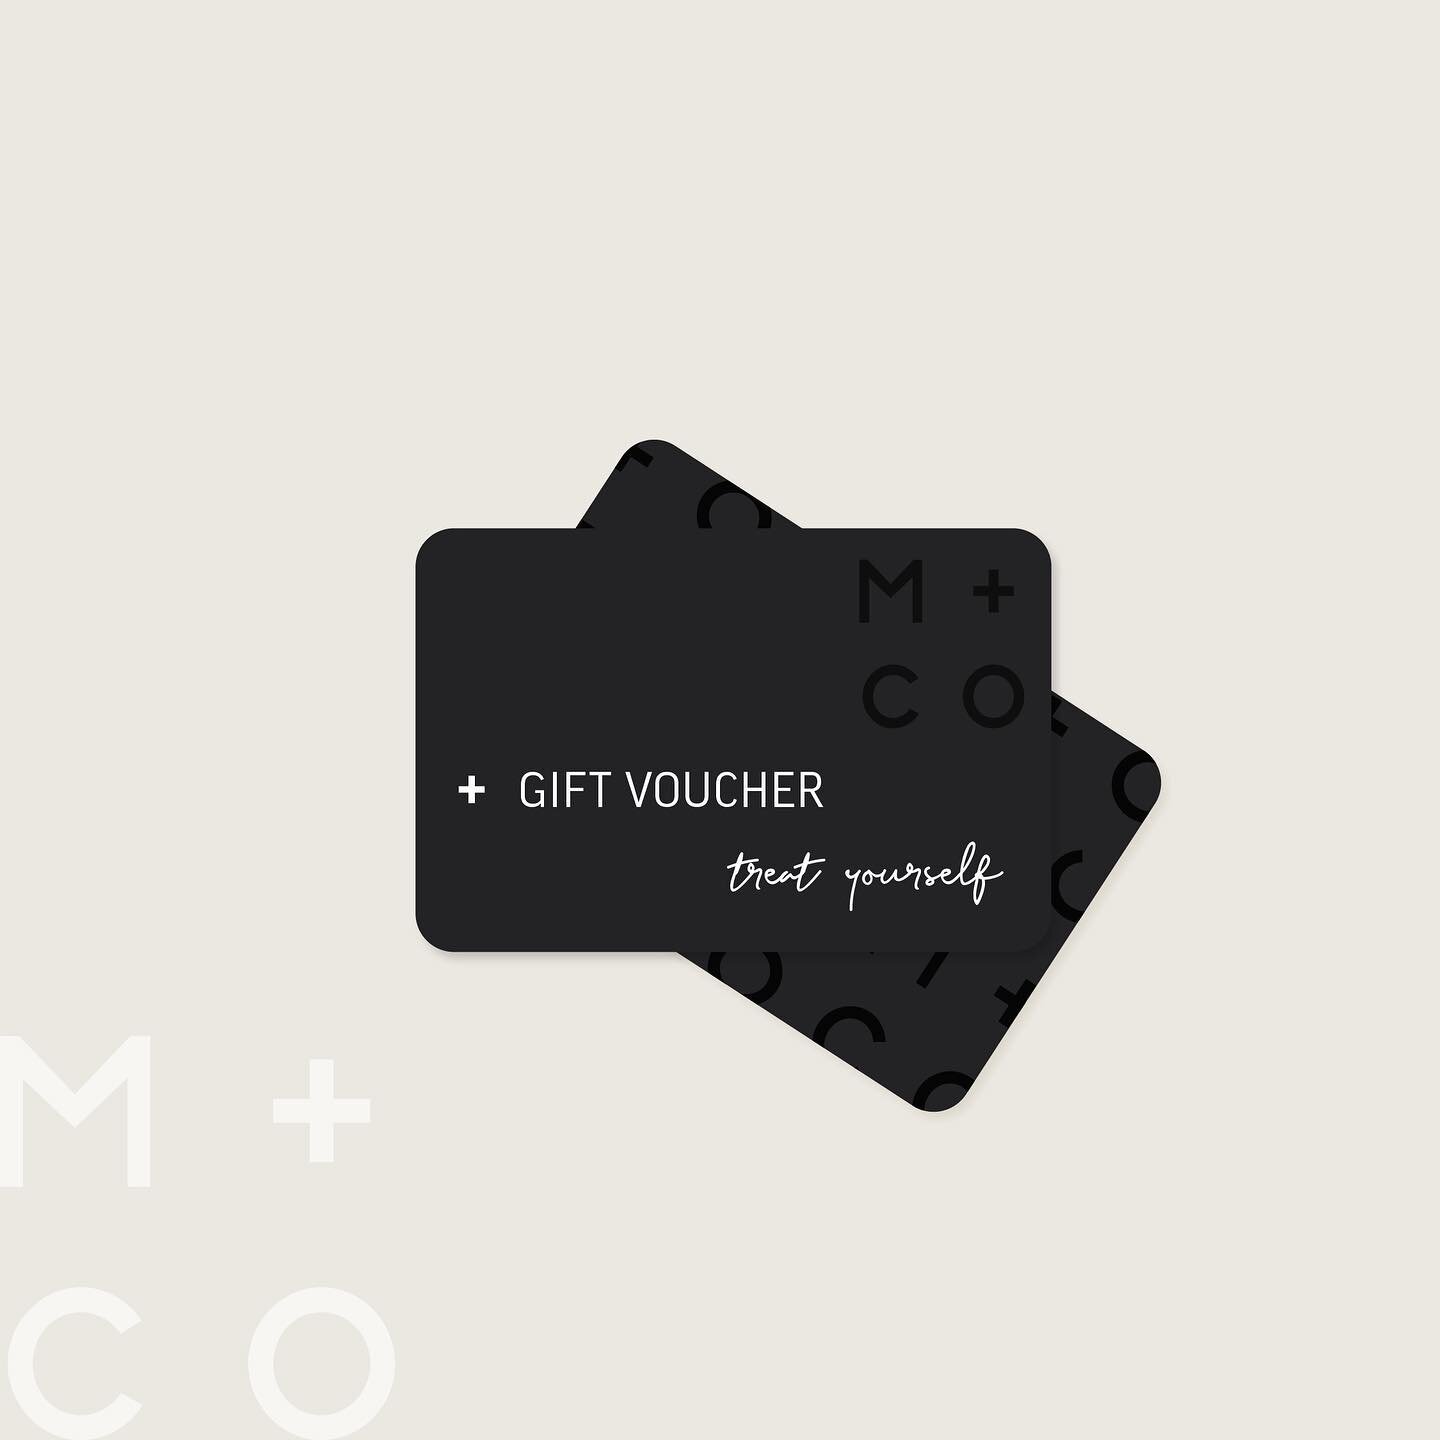 Supporting local businesses right now has never been more crucial! 🌸

At Madeleine &amp; Co, although our doors are currently closed, we are so happy to announce that you can now purchase gift cards via our BRAND NEW website 🎉

The perfect present 